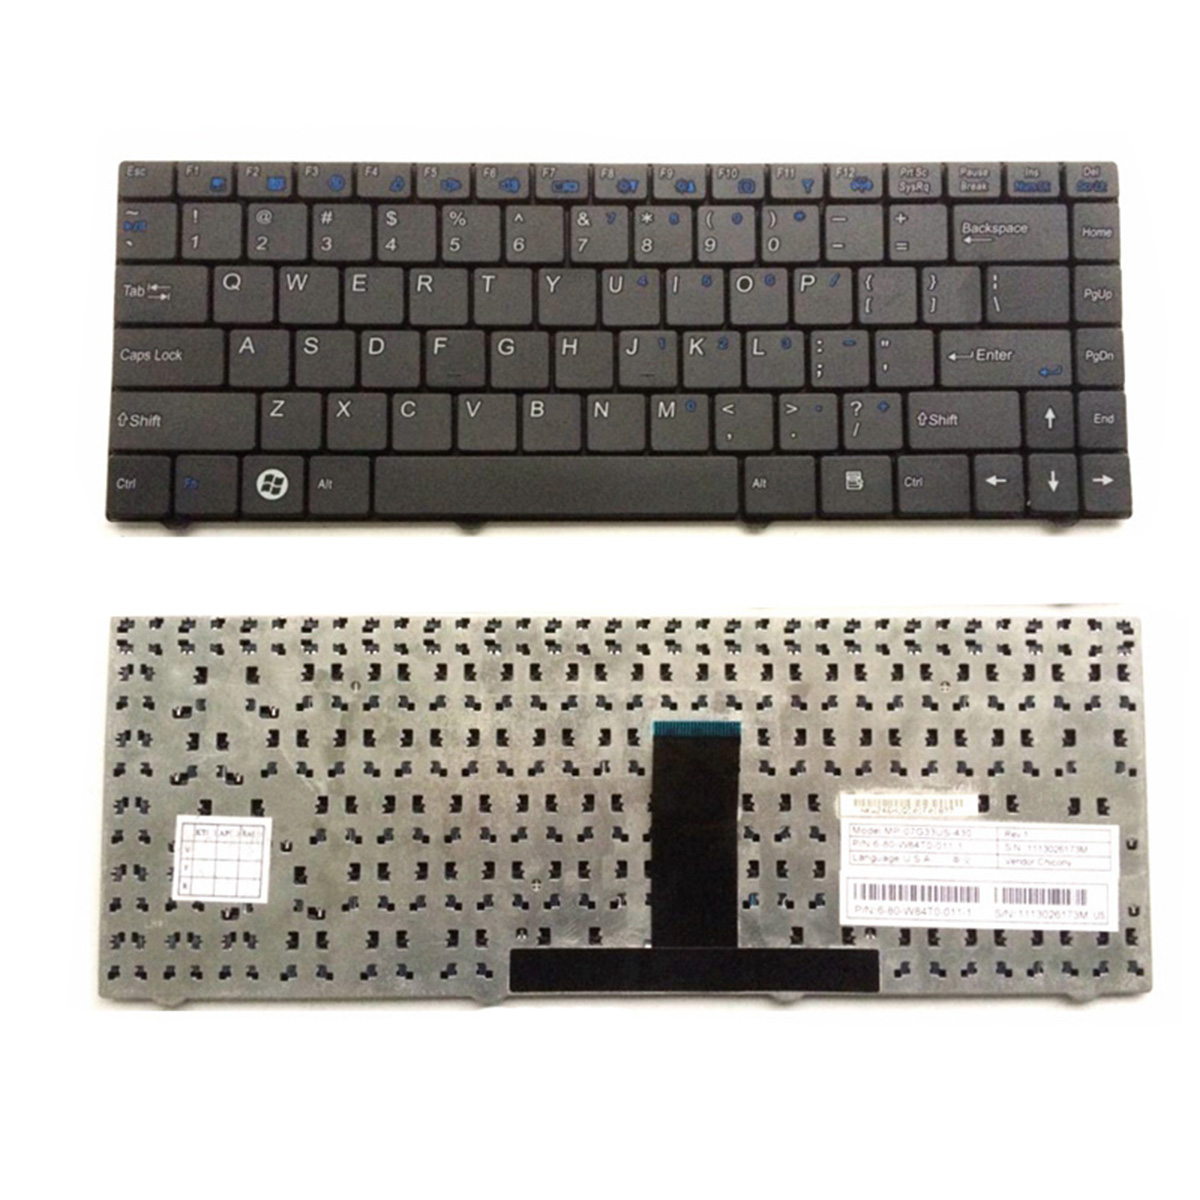 US English Keyboard for Clevo W84 W84T Series MP-07G33US-430 Laptop Replacement Keyboard